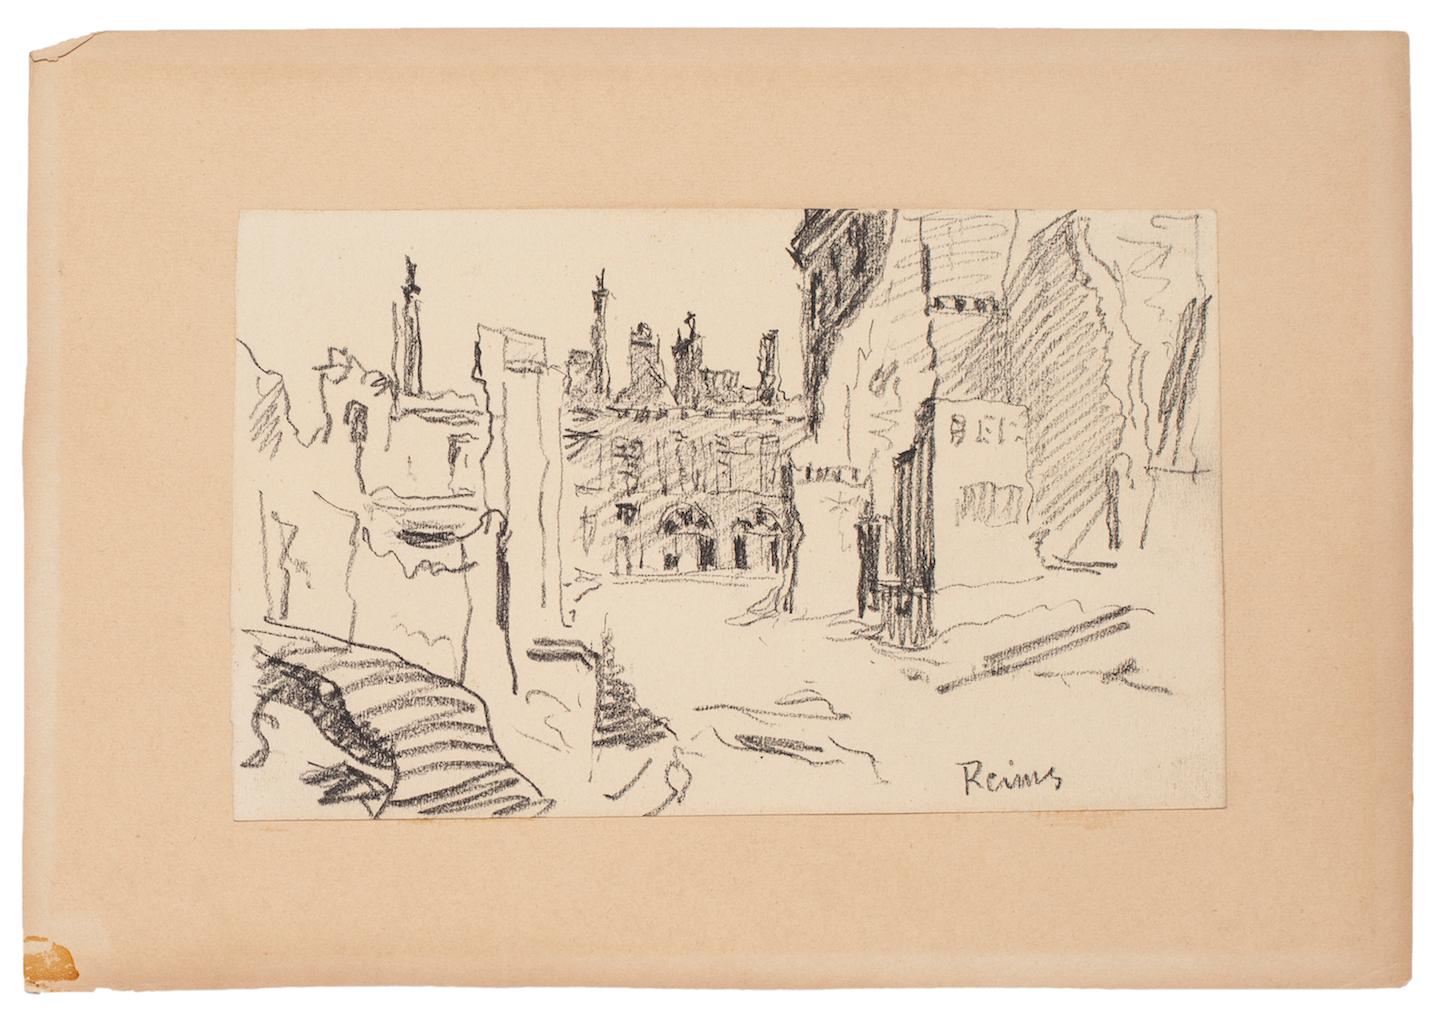 View of Reims - Original Lithograph on Paper - 1940 ca.